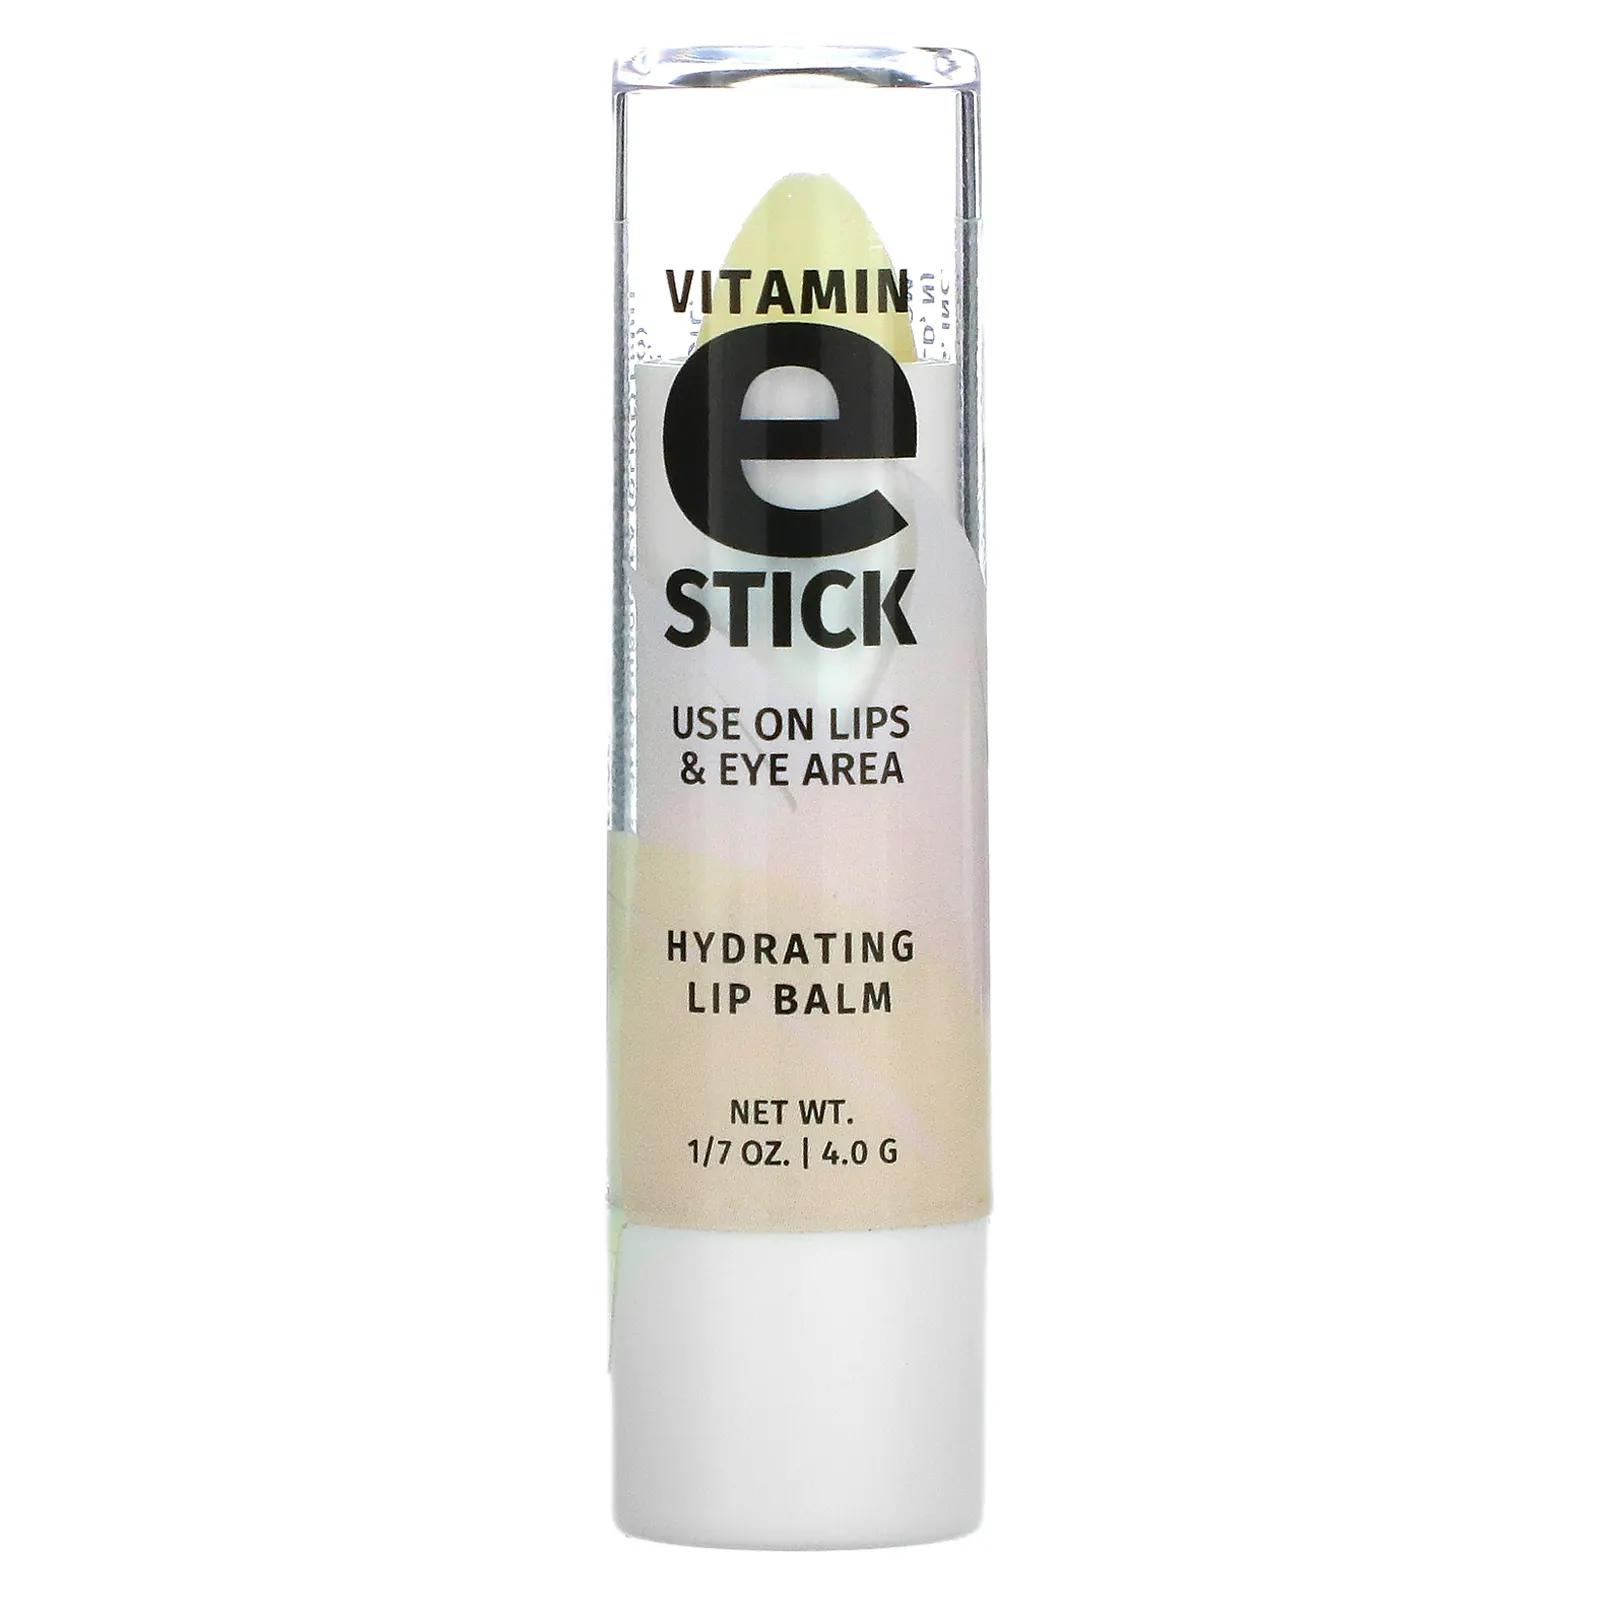 Reviva Labs Vitamin E Stick 1/7 oz. (4.0 g) lewis labs brewer s yeast 12 35 oz 350 g